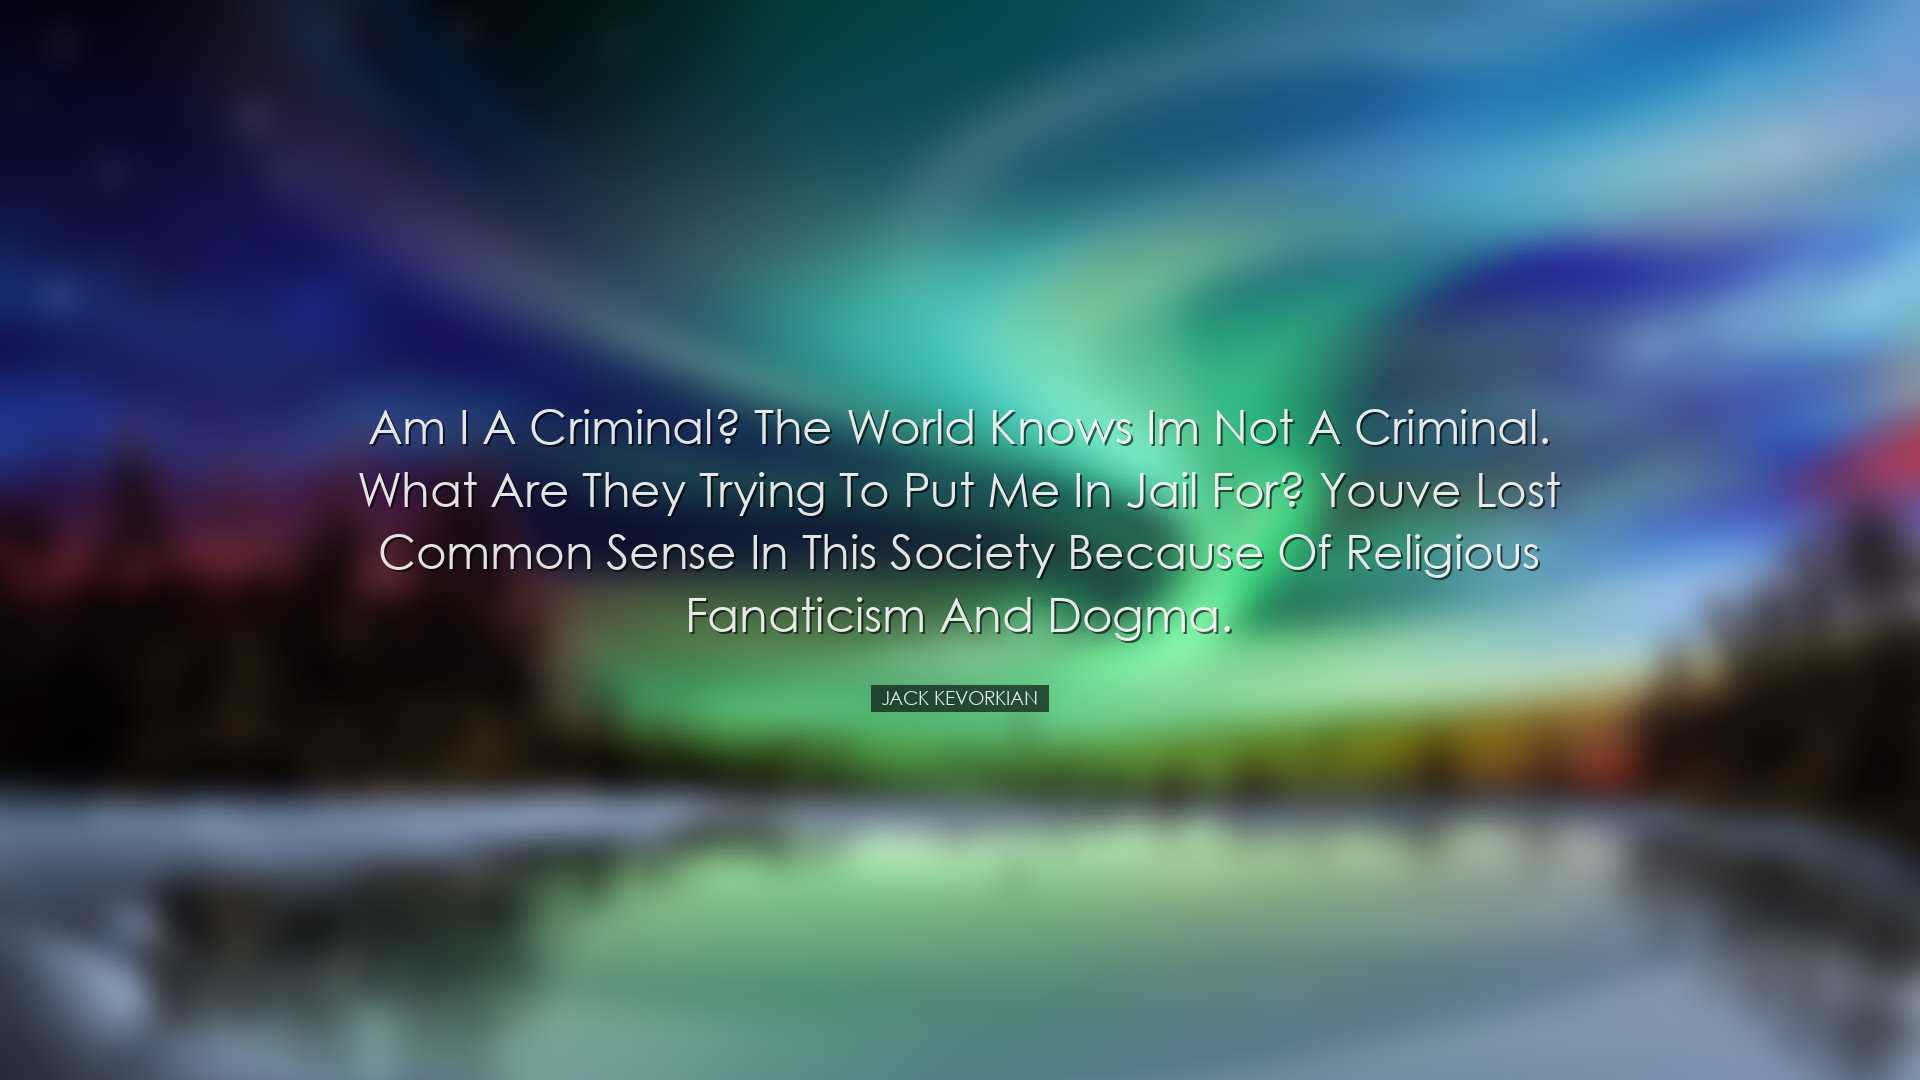 Am I a criminal? The world knows Im not a criminal. What are they